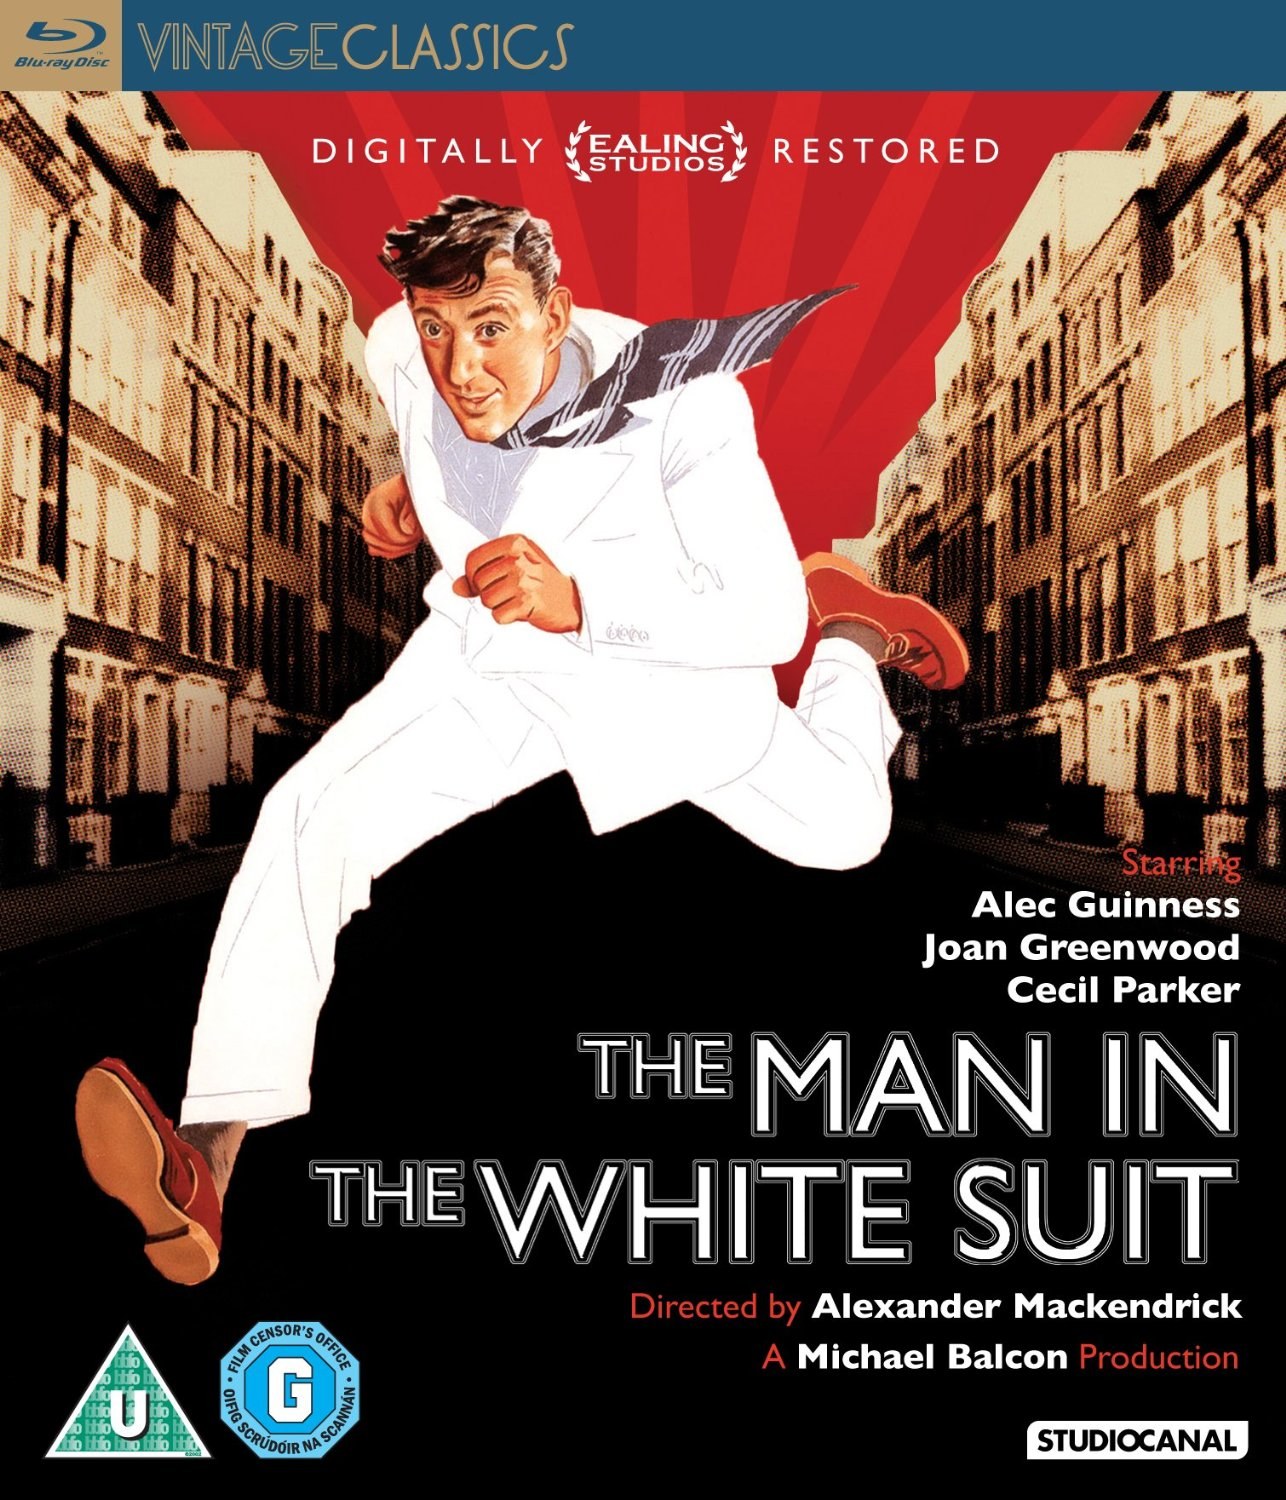 Front cover of The Man in the White Suit Blu-ray featuring Alec Guinness.  Part of the Vintage Classics series from Studio Canal.